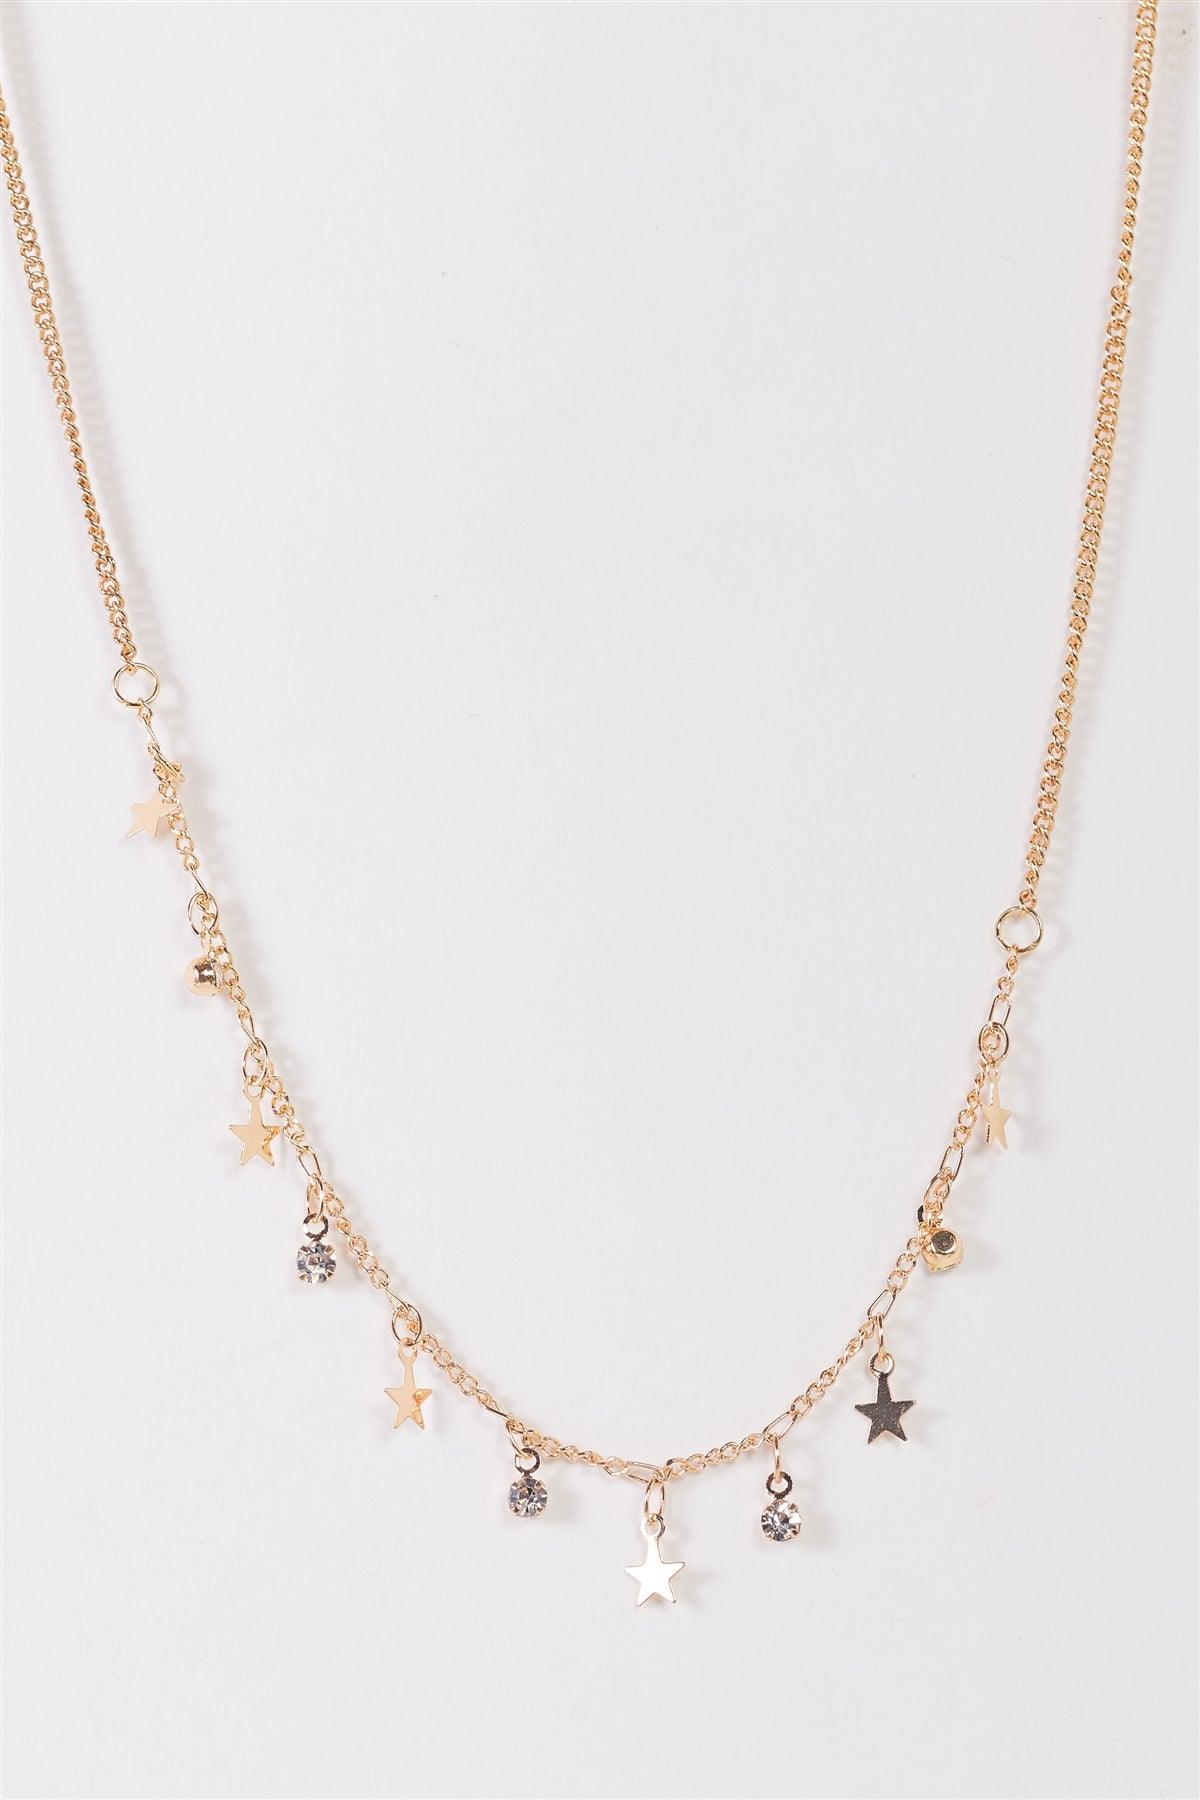 Gold Link Chain With Star & Faux Diamond Charms Necklace /3 Pieces